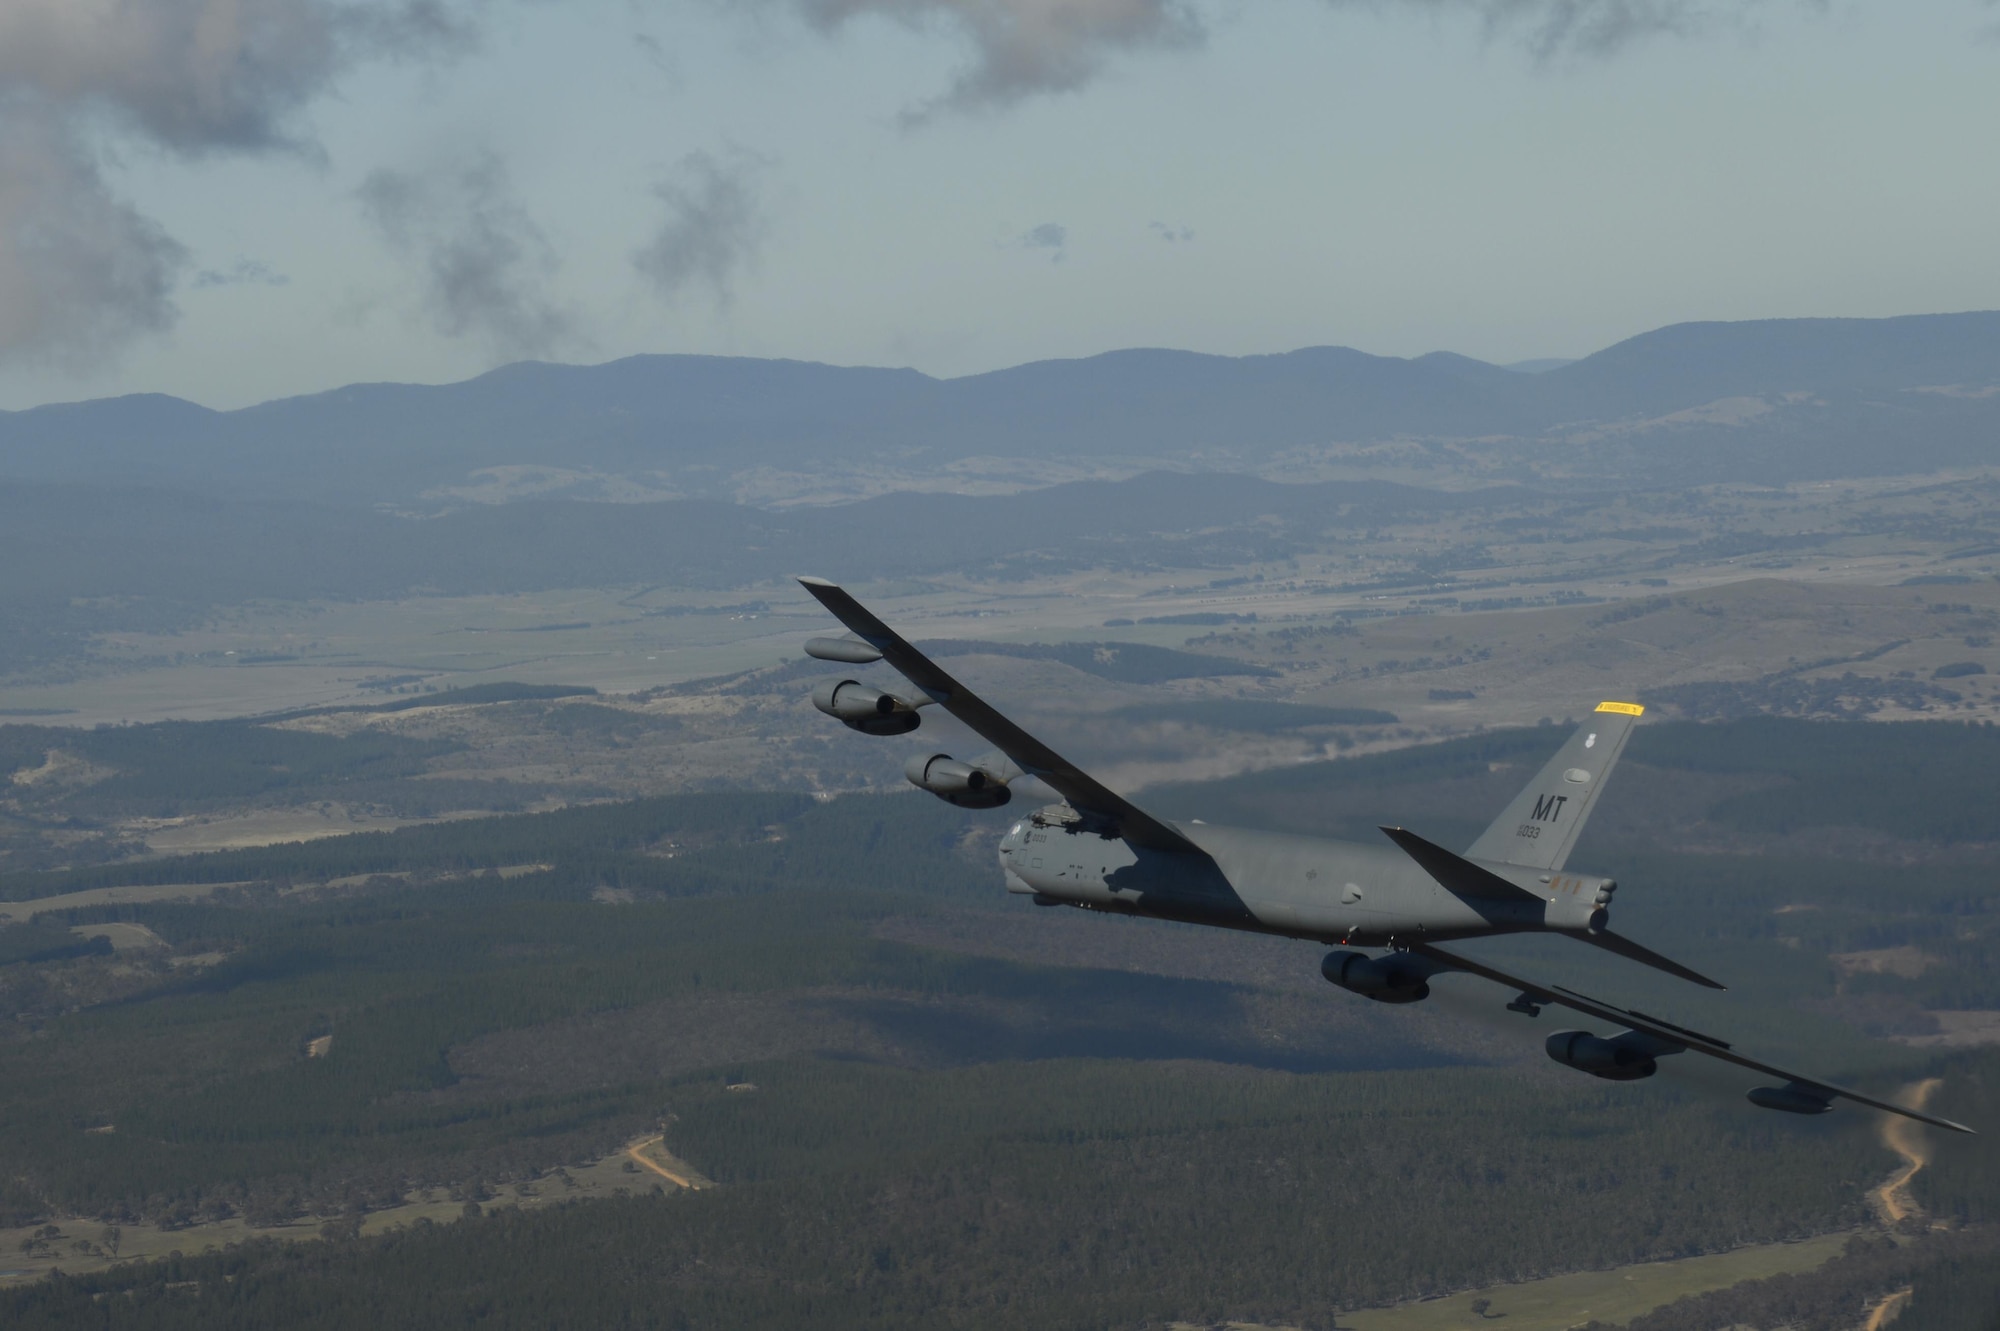 A U.S. Air Force B-52H Stratofortress conducts a training mission over the Delamere Training Range in Northern Australia during Exercise Pitch Black, Aug. 18, 2016. PB16, a multilateral exercise hosted by Australia from Jul. 29 through Aug. 19, allowed participant nations to exercise deployed units in the tasking, planning and execution of offensive counter air and offensive air support while utilizing one of the largest training airspace areas in the world. (U.S. Air Force photo by Staff Sgt. Sandra Welch)